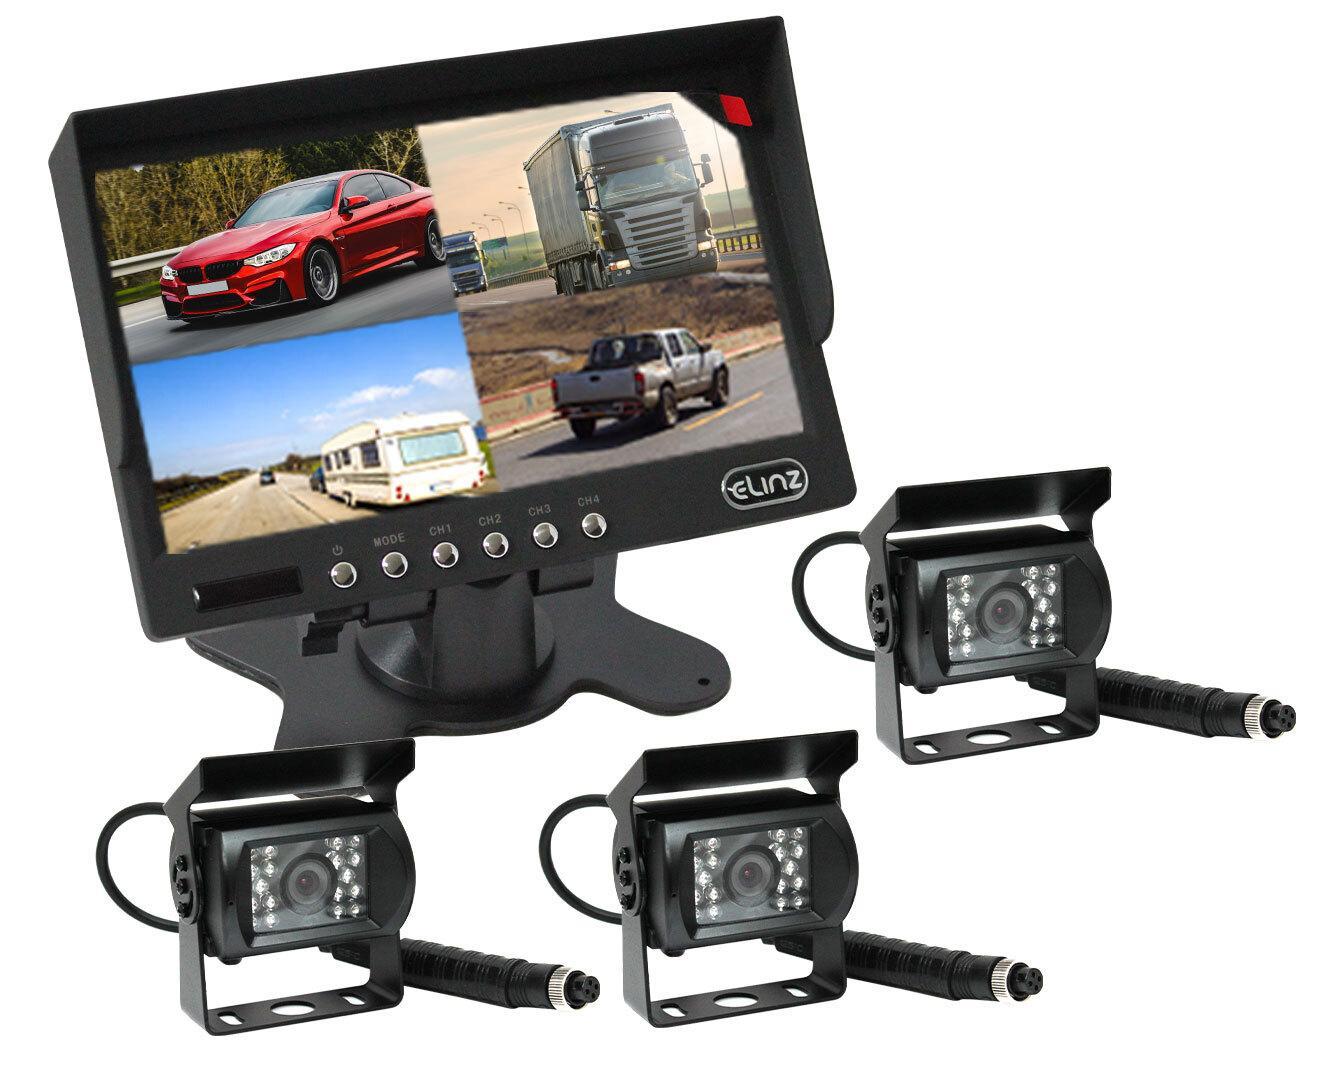 Elinz 7" Quad Monitor Splitscreen with 3 Cameras Package